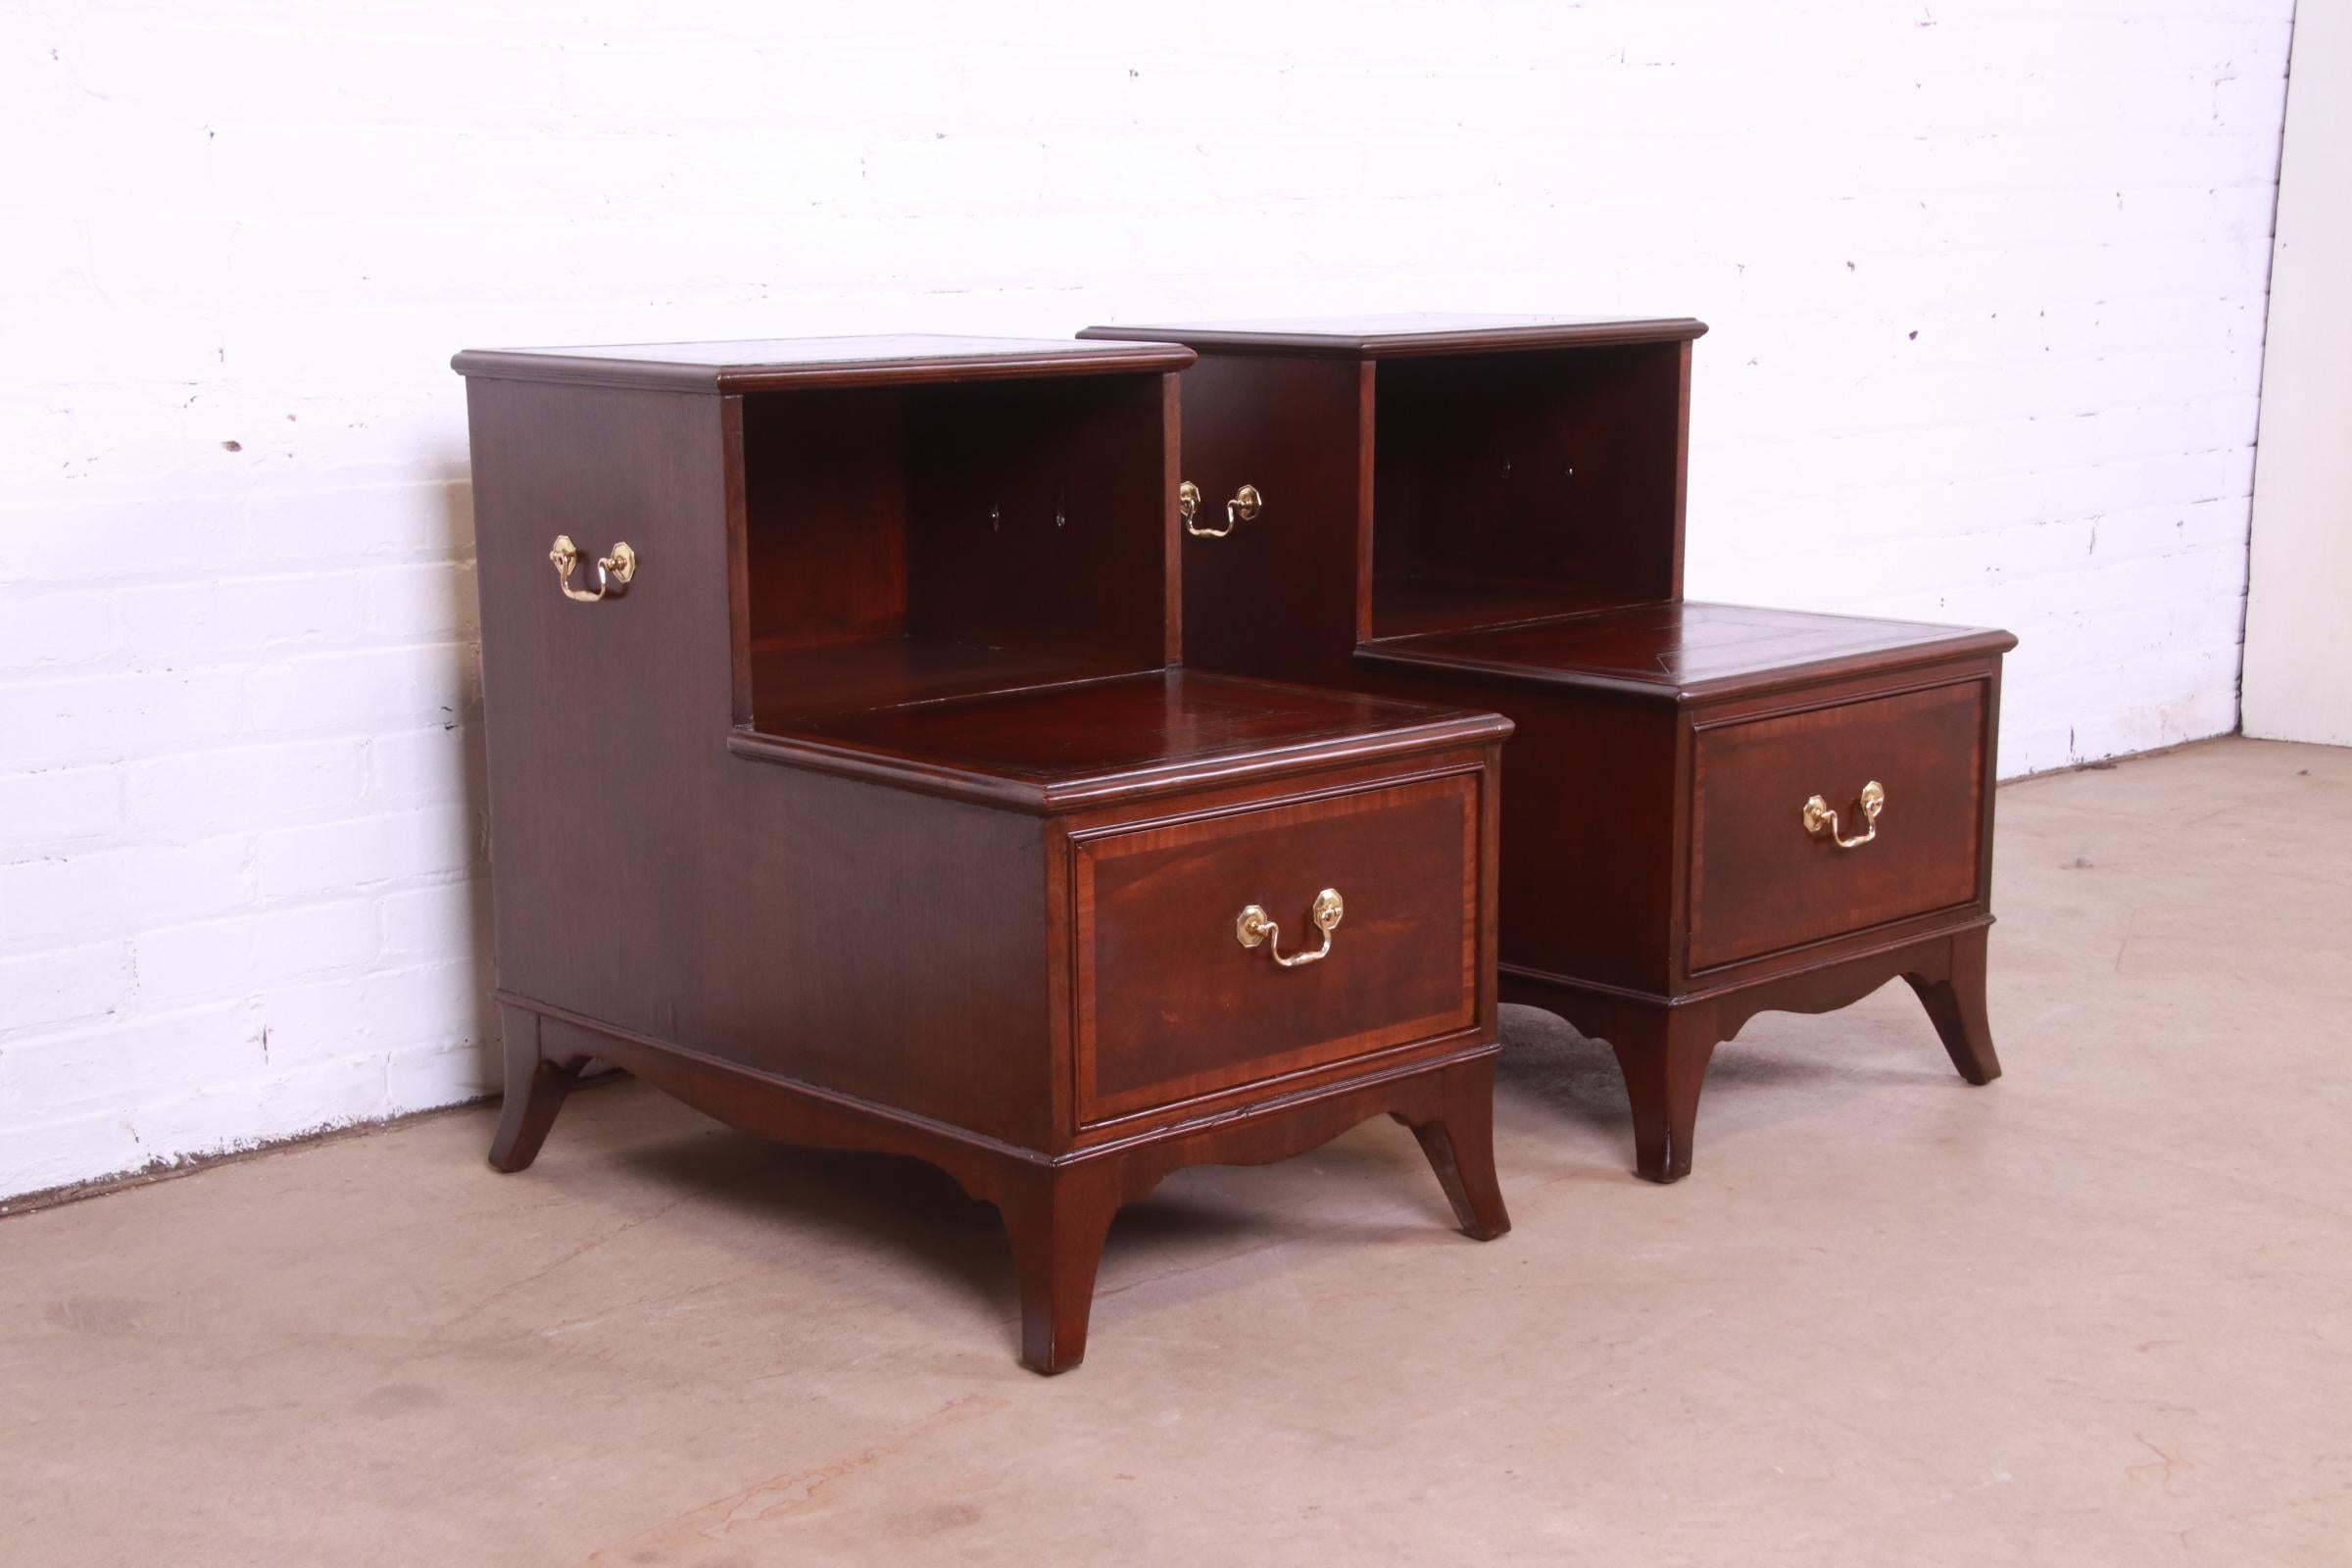 20th Century Heritage Georgian Mahogany Leather Top Step End Tables or Nightstands, Pair For Sale